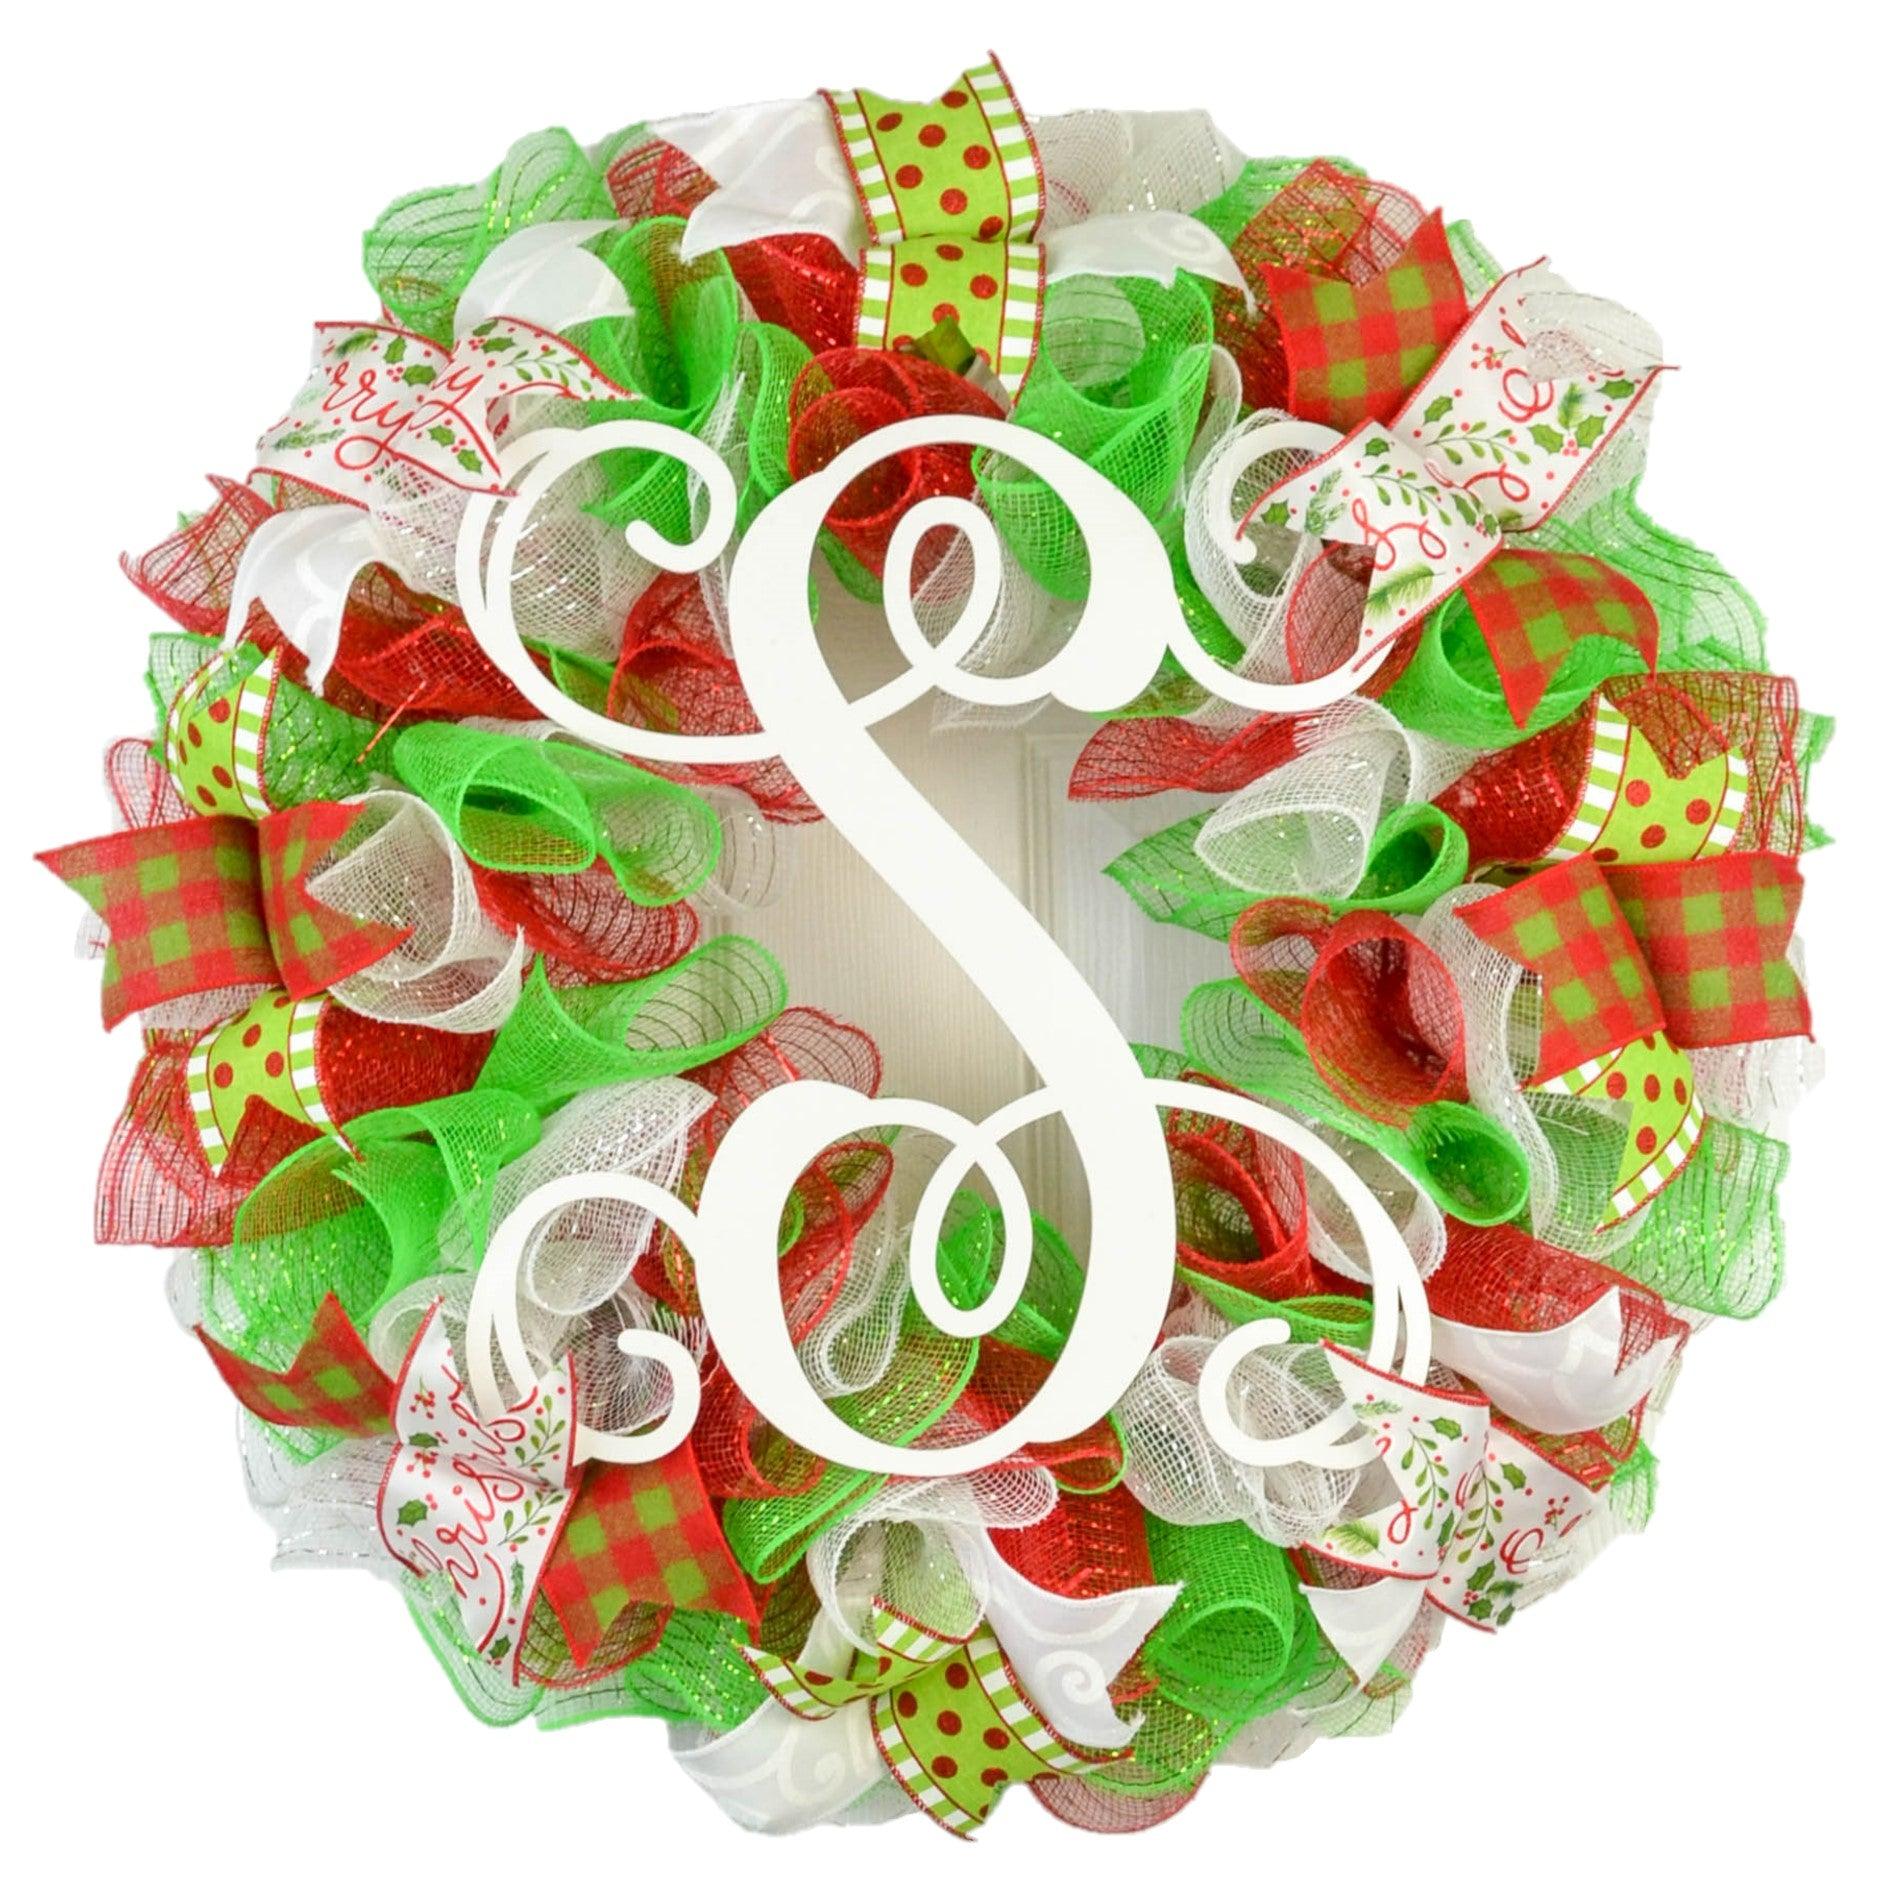 Red Lime Green White Christmas Wreath - Outdoor Holiday Front Door Decorations - Porch Decor TB15 - Pink Door Wreaths